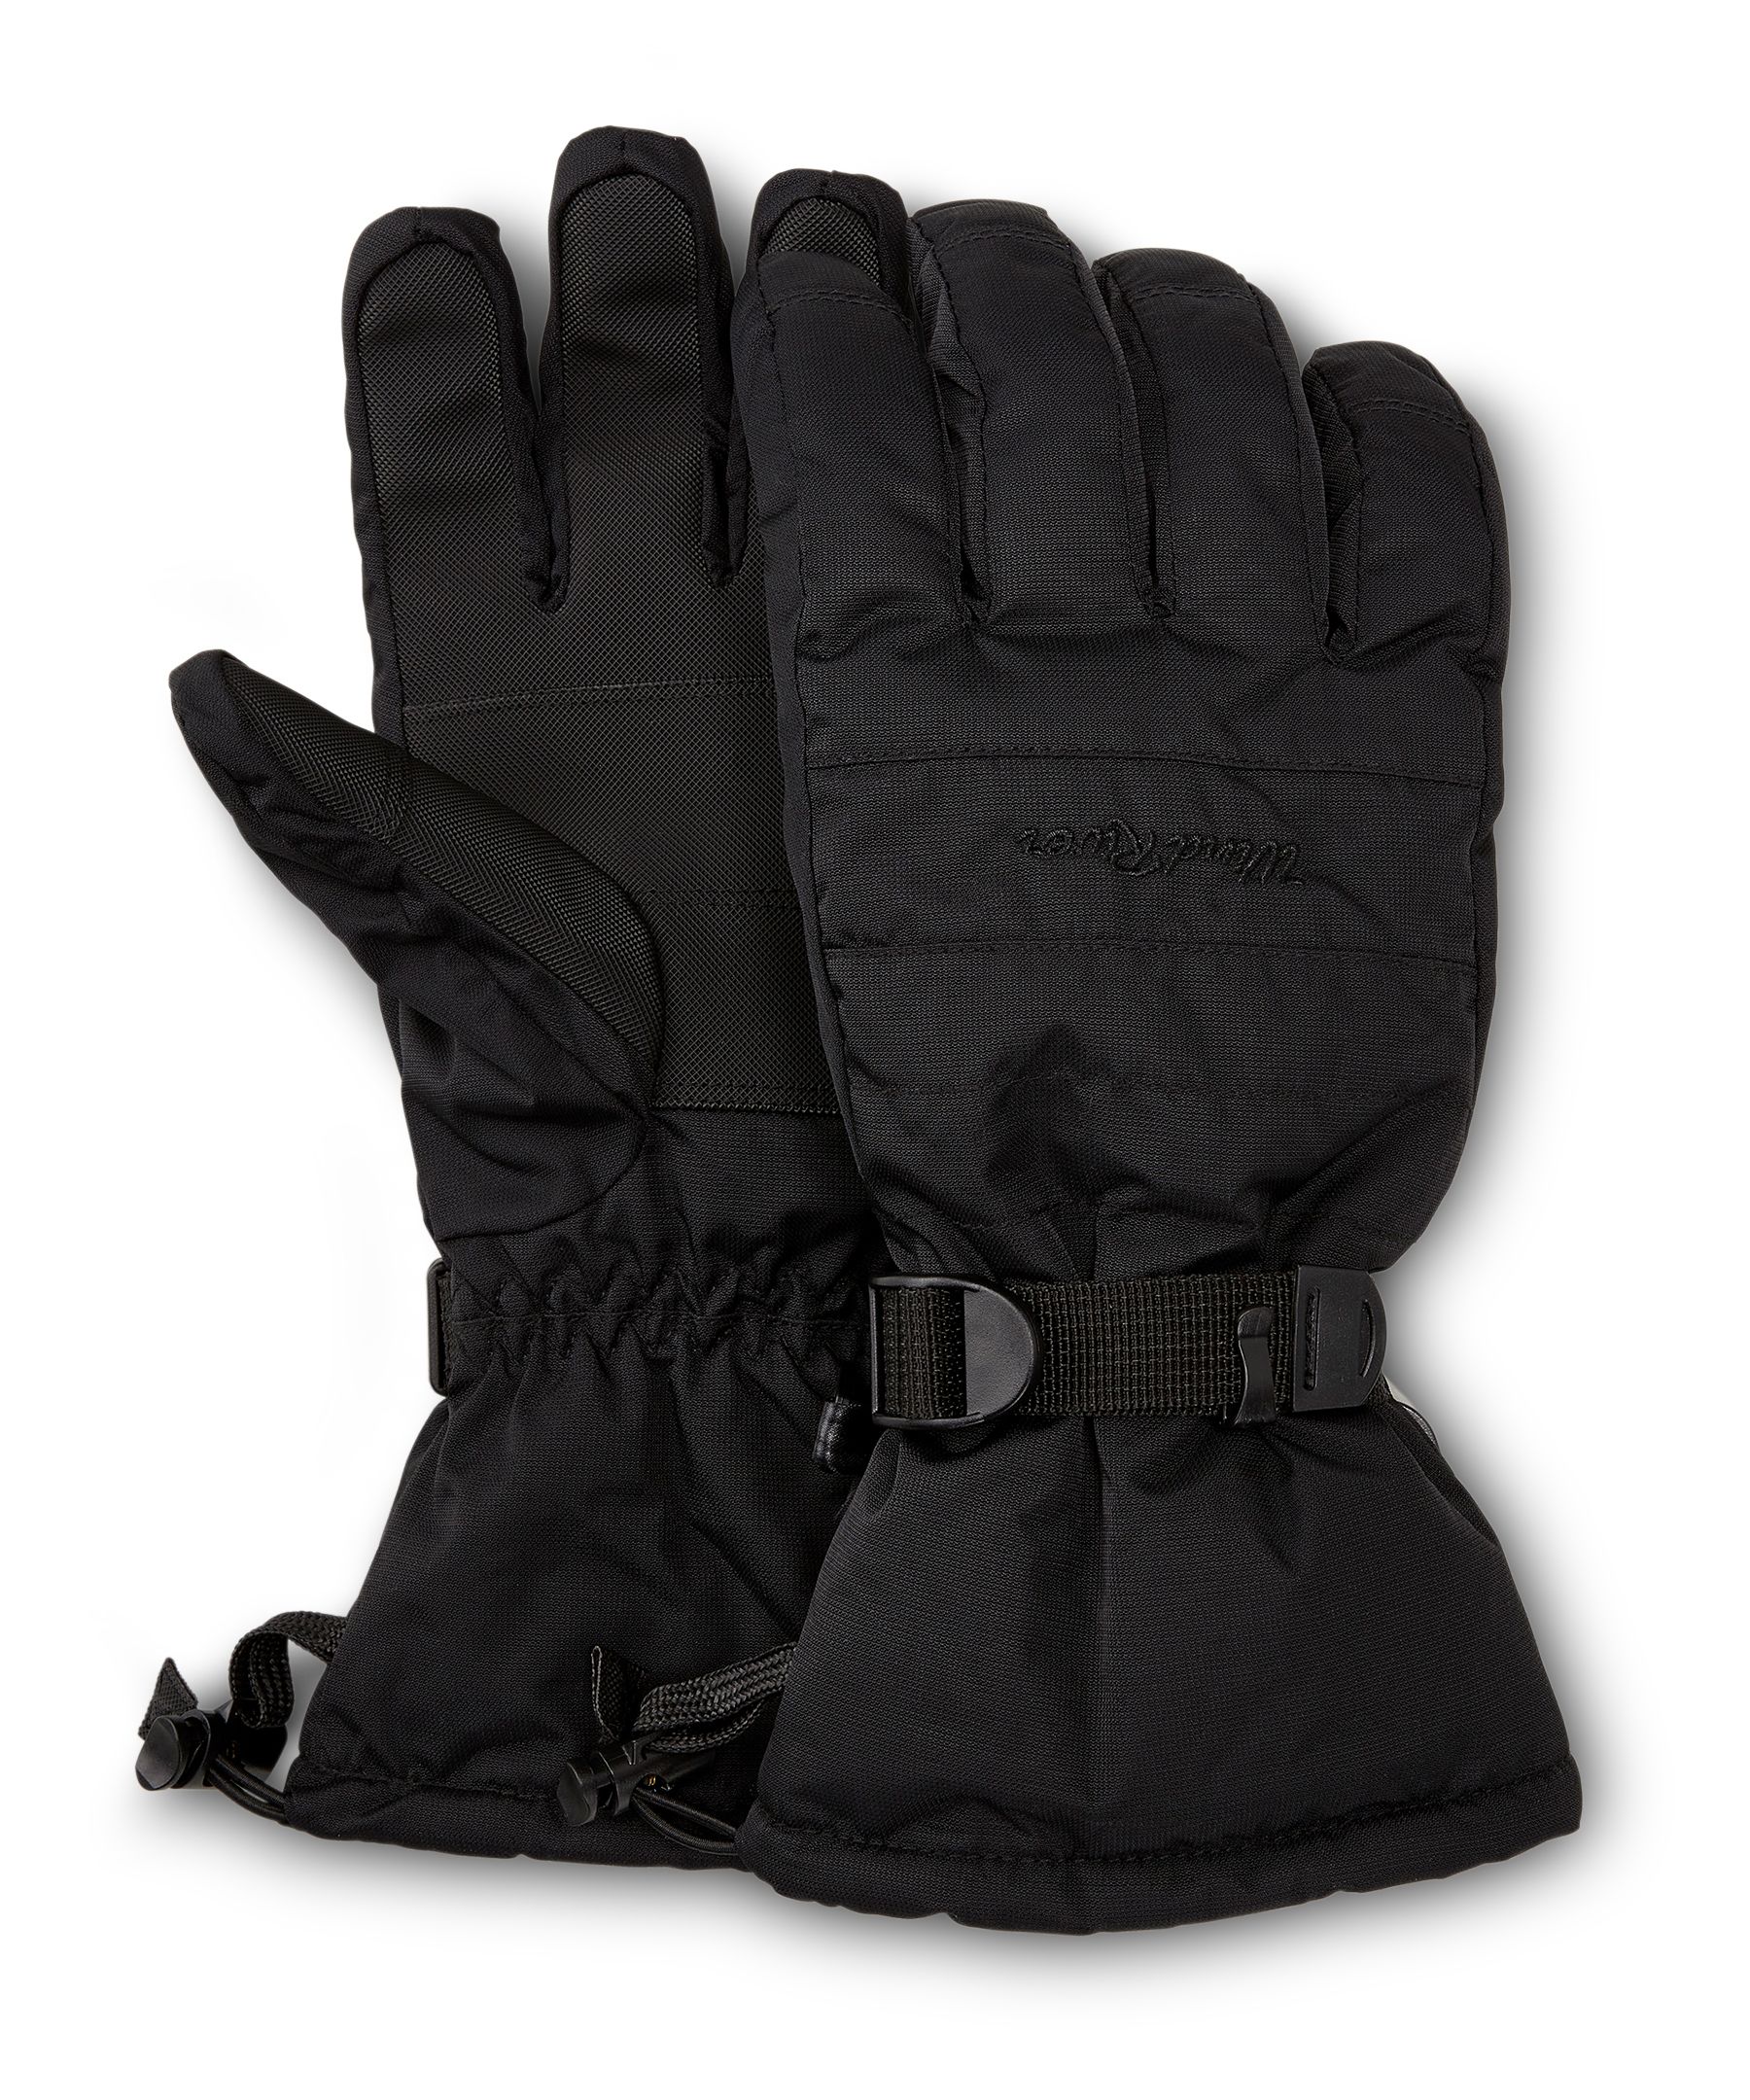 WindRiver Men's Water Resistant Insulated Ski Gloves